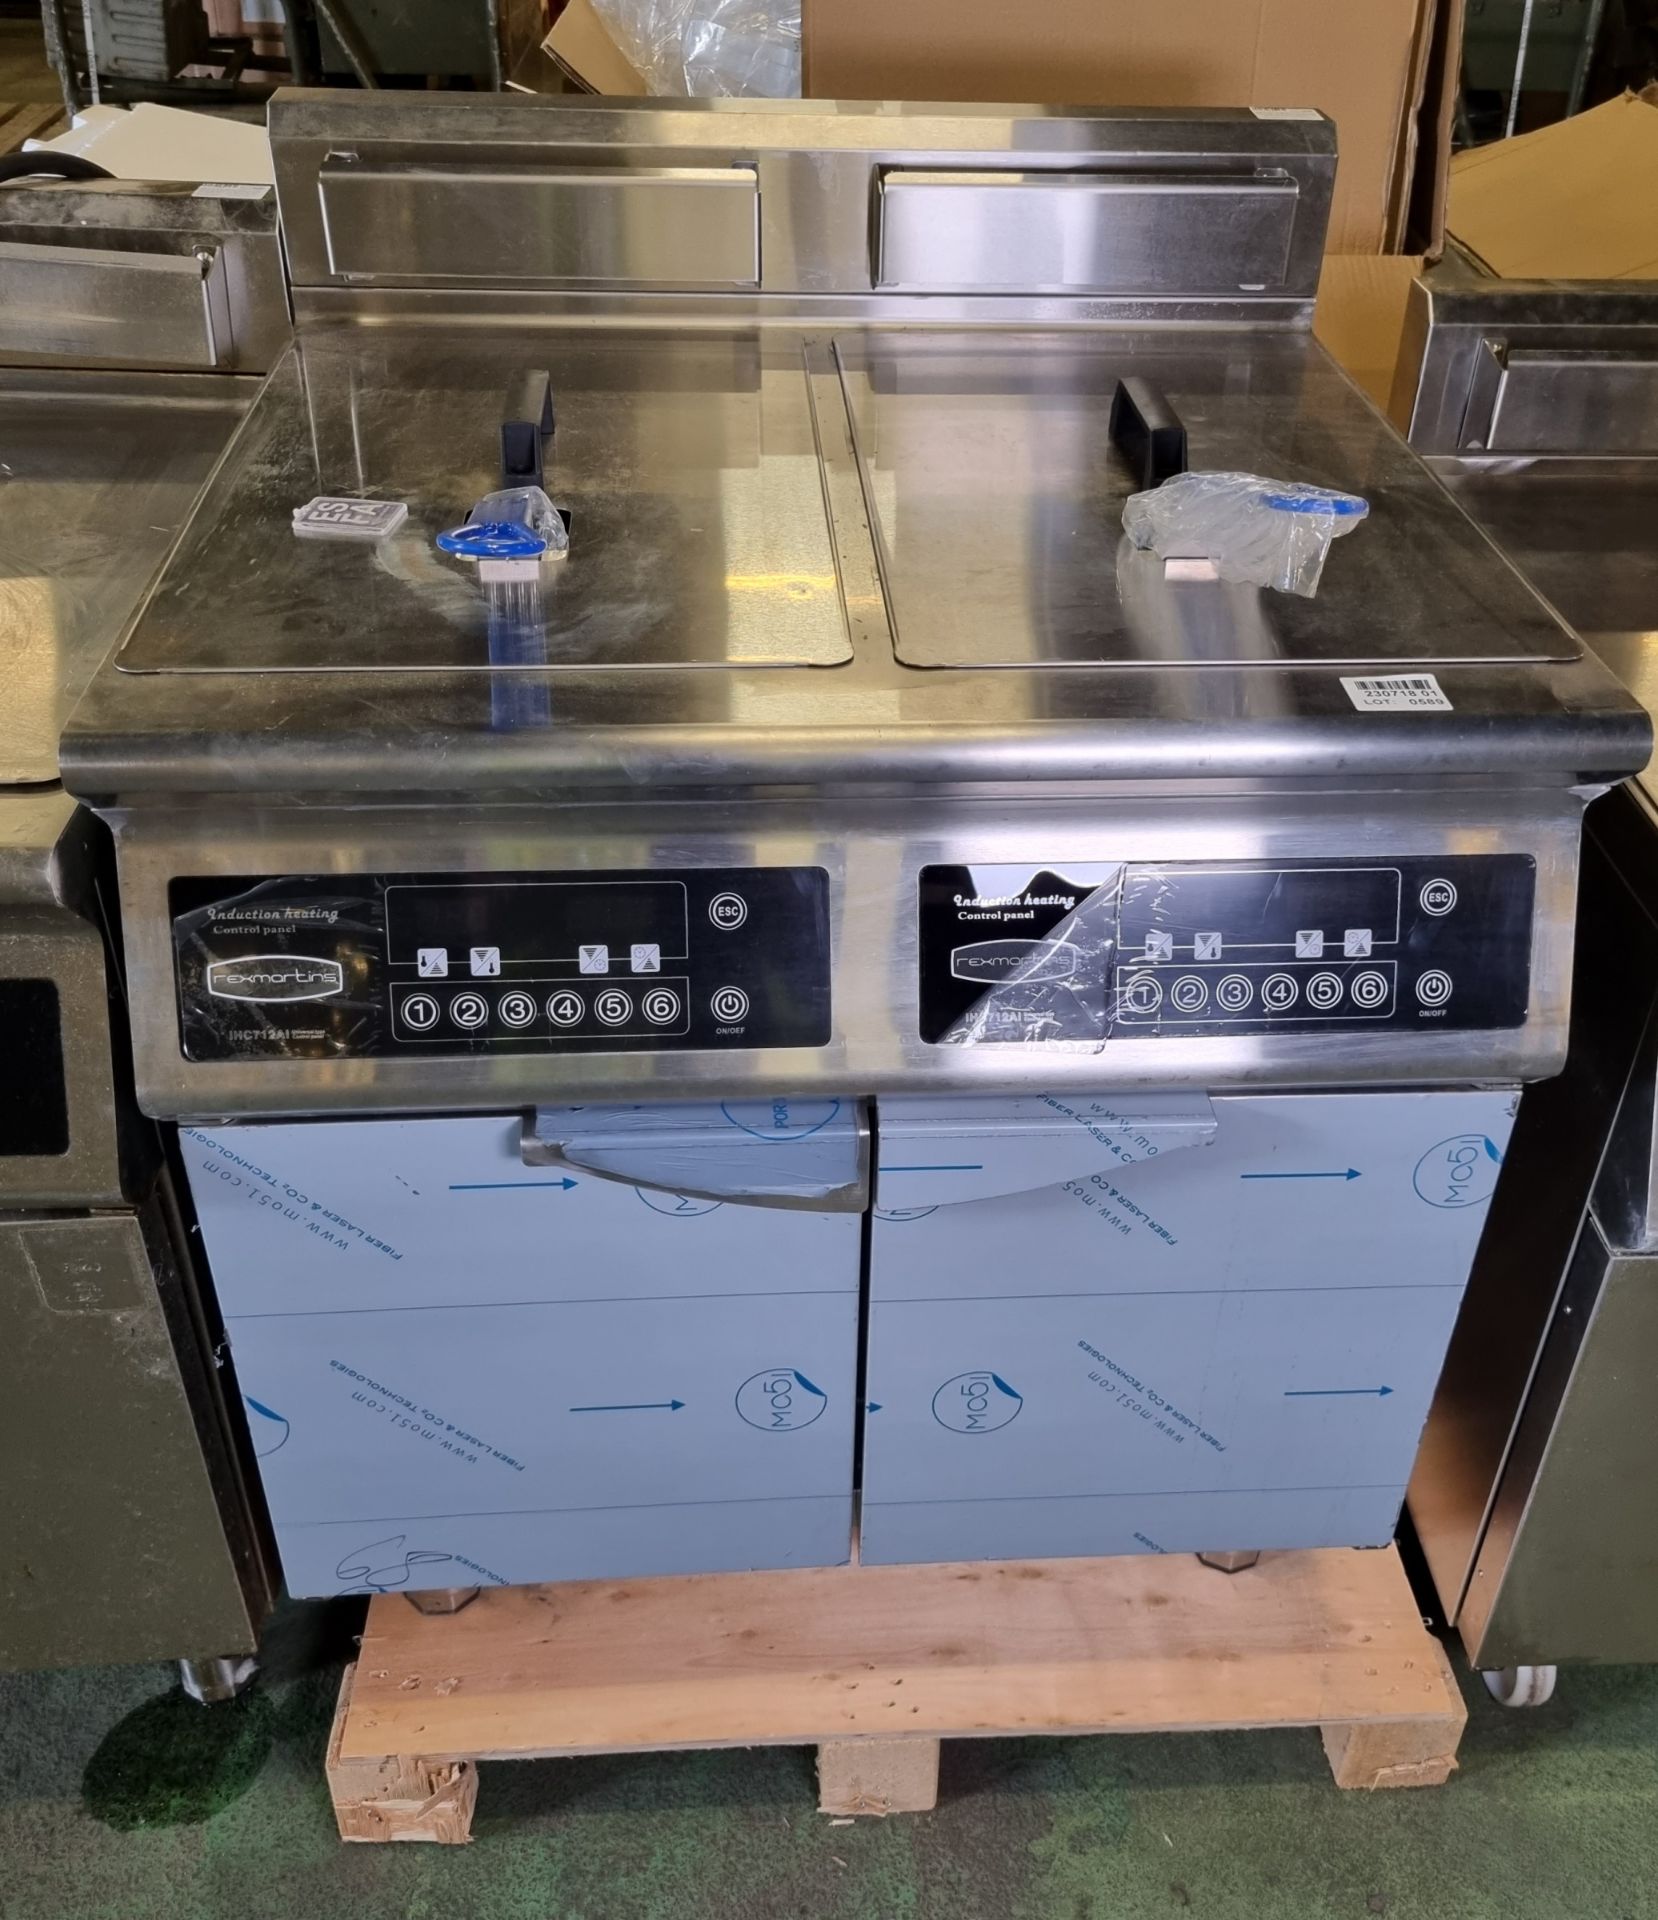 Rexmartins RESC-8B-16 free standing electric induction fryer - double tank with baskets - W 800